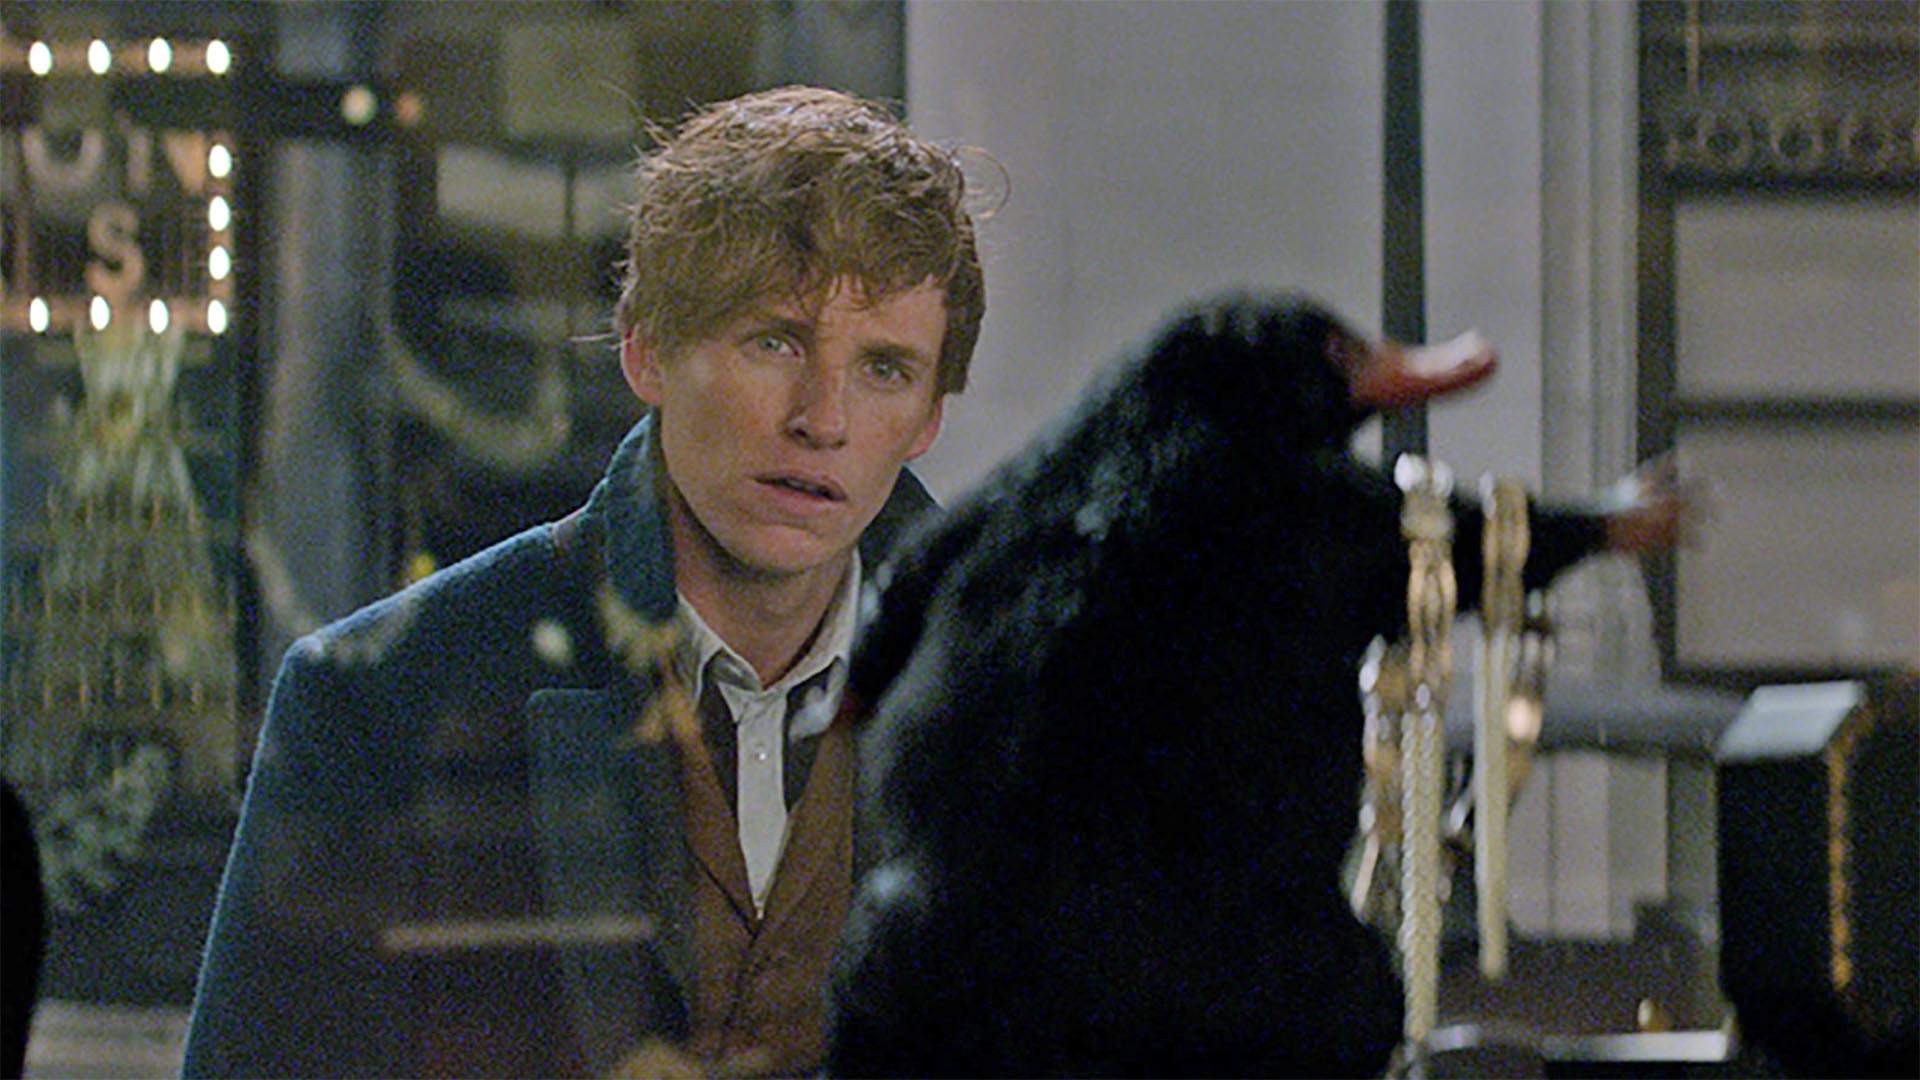 'Fantastic Beasts' Is Being Turned Into a Huge 'Harry Potter'-Themed Natural History Exhibition